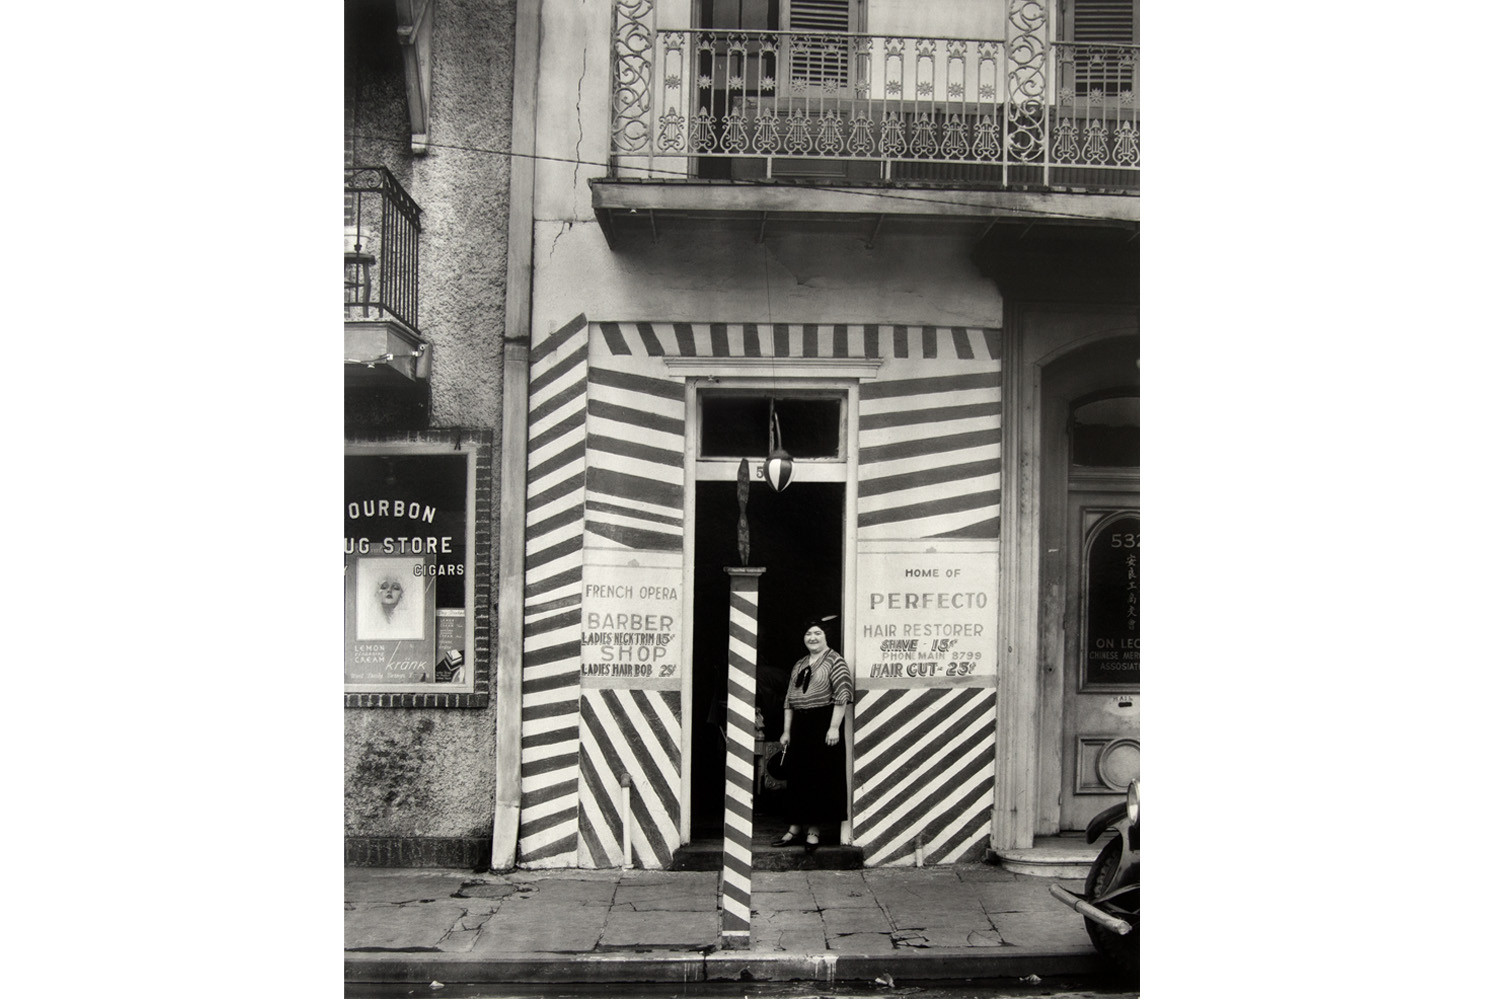 SIDEWALK AND SHOPFRONT,
NEW ORLEANS. FSA, 1935, by Walker Evans (American, 1903 – 1975). Silver print, 9 1/2 x 7 1/2 inches. Courtesy of the Collection Martin Z.  Margulies.